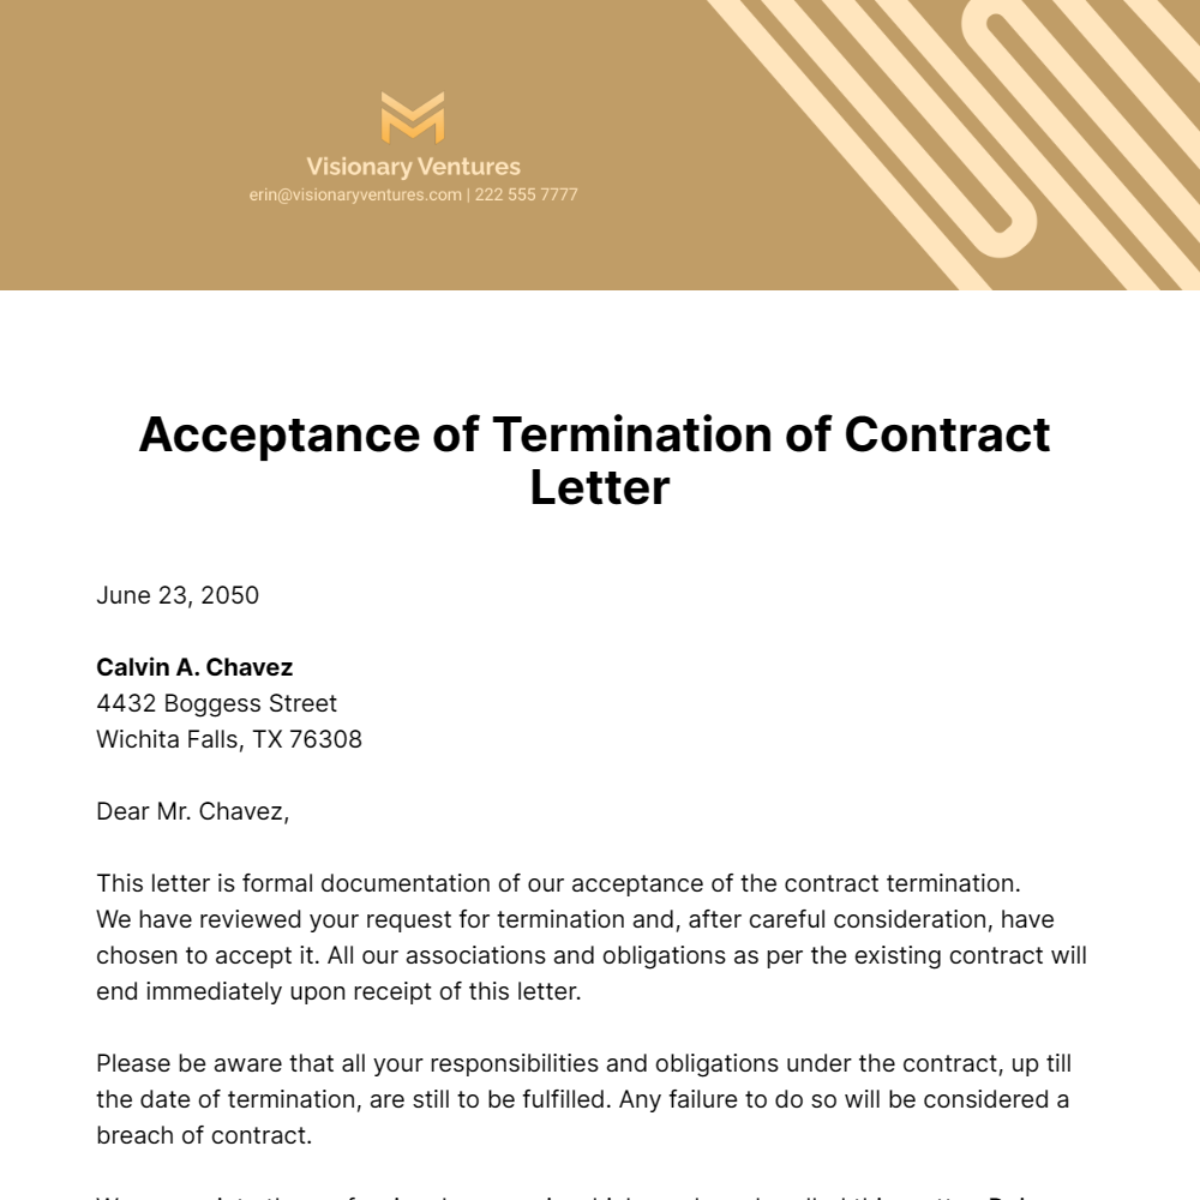 Acceptance of Termination of Contract Letter Template